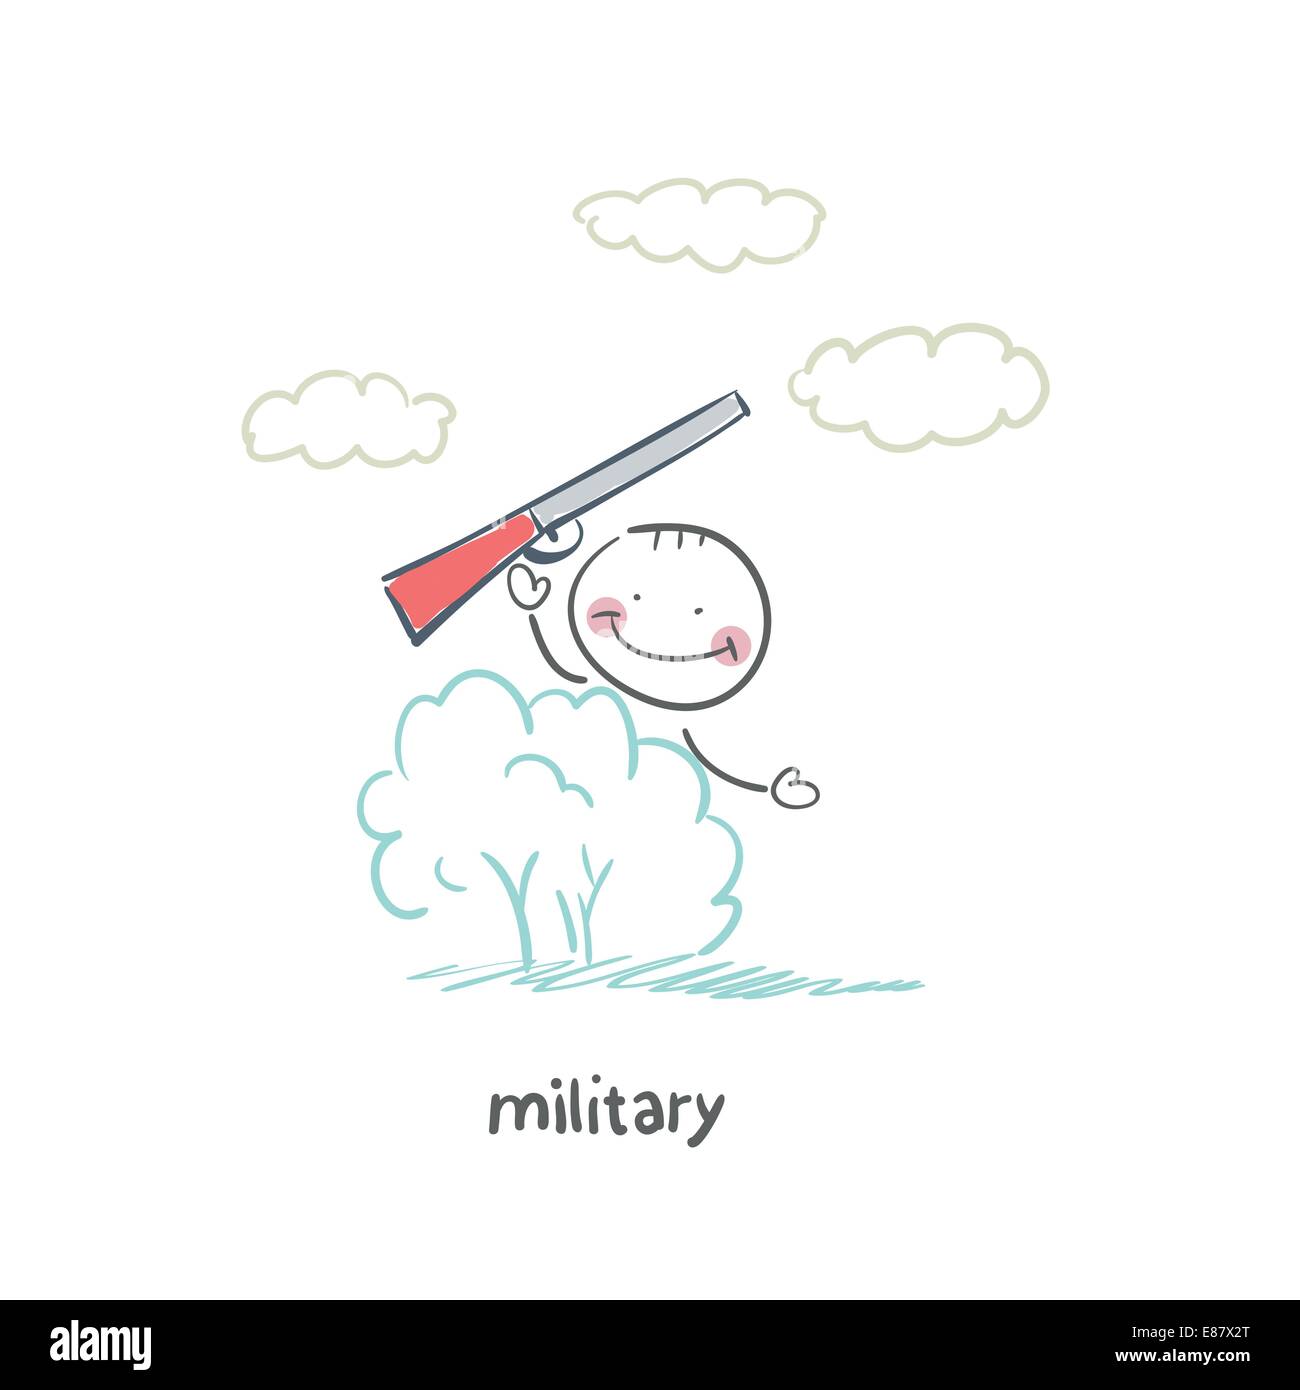 military Stock Vector